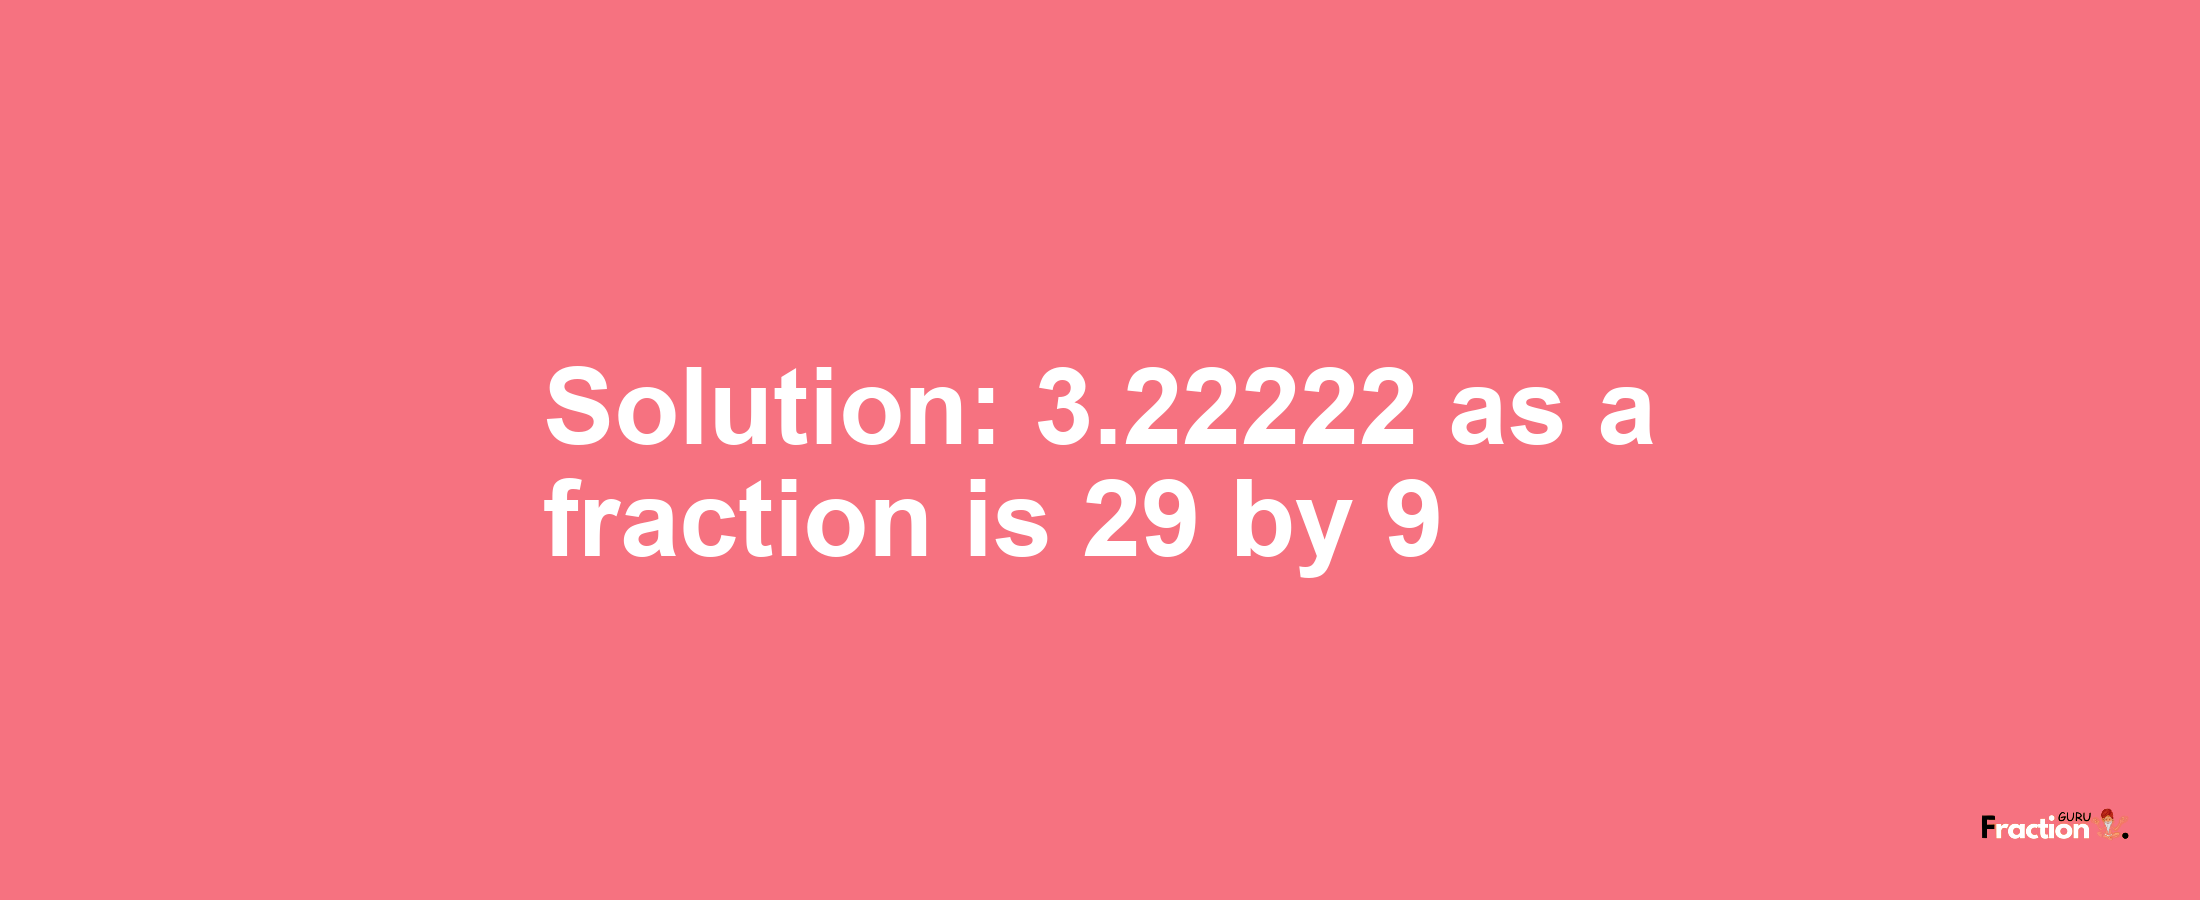 Solution:3.22222 as a fraction is 29/9